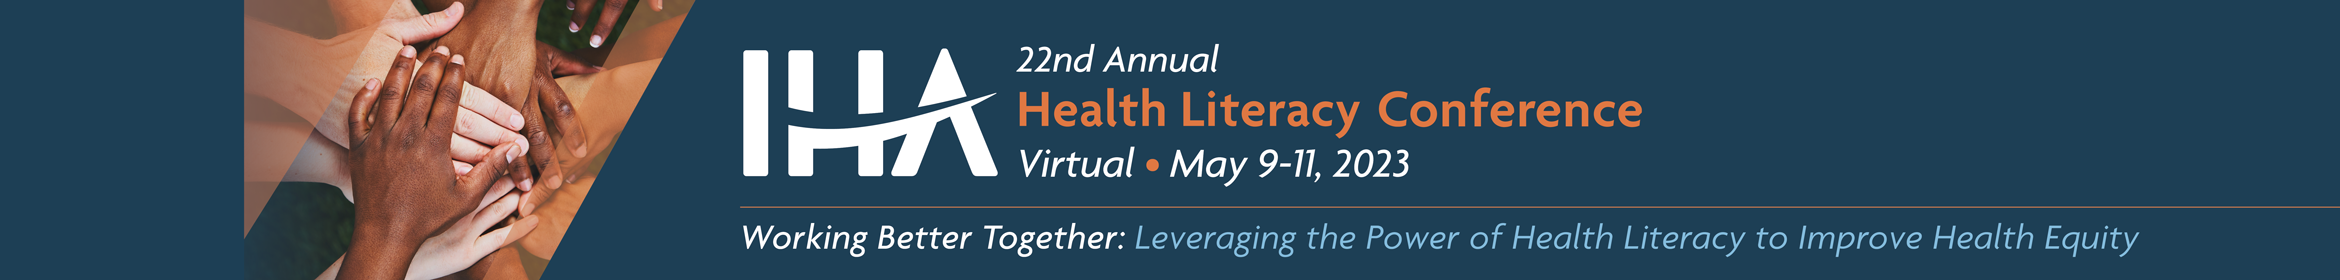 IHA's 22nd Annual Health Literacy Conference Main banner